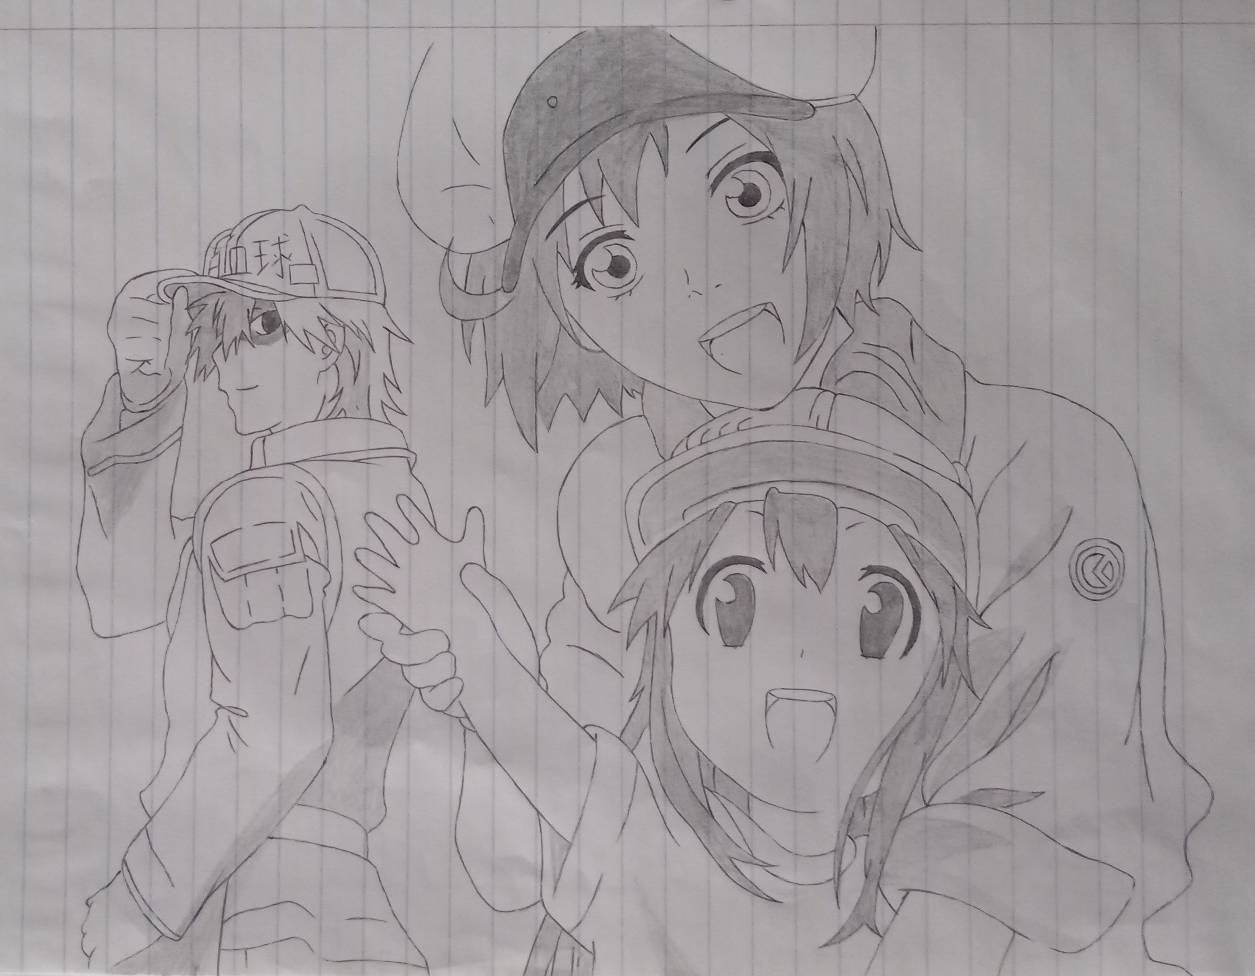 Drawing of the Hataraku Saibou! characters by CypherSoldier on DeviantArt